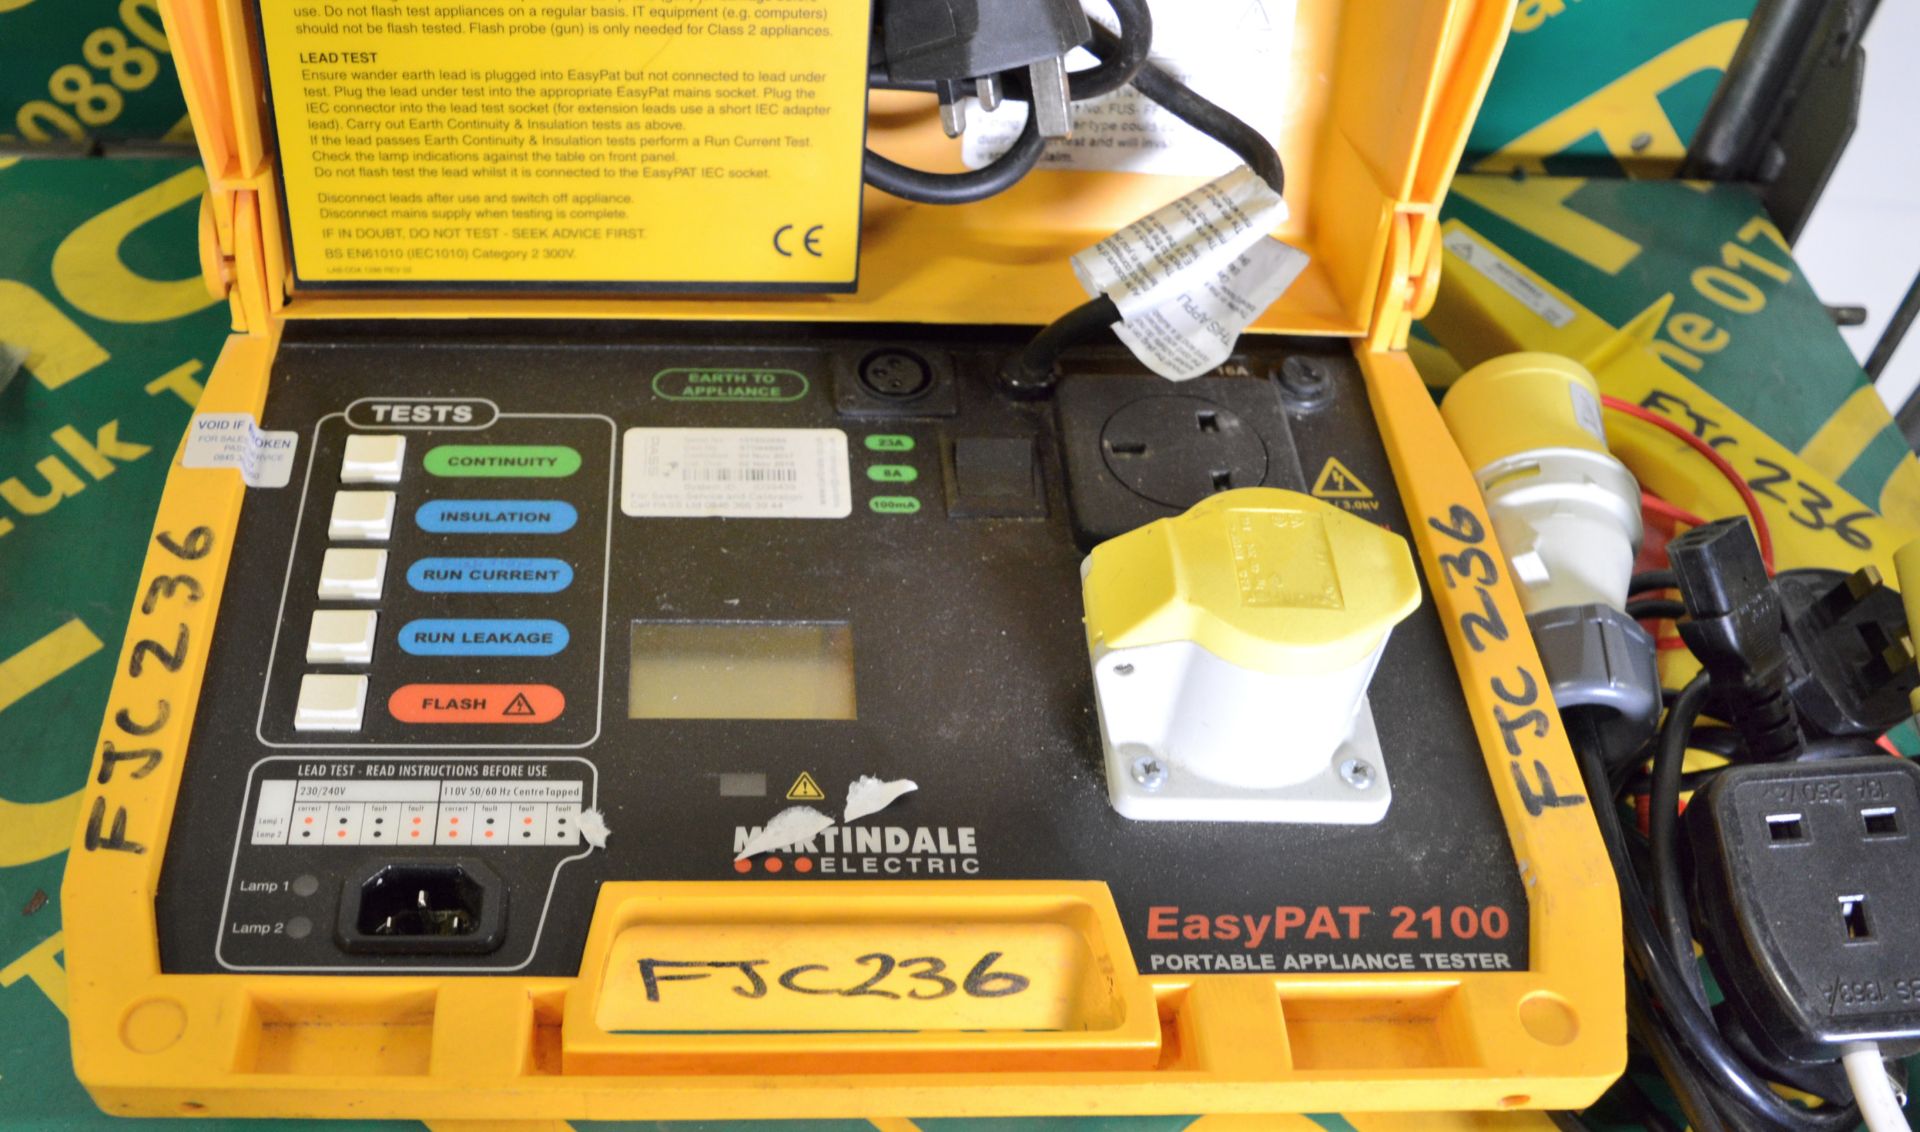 Martindale Easy PAT 2100 Portable Appliance Tester - Image 2 of 2